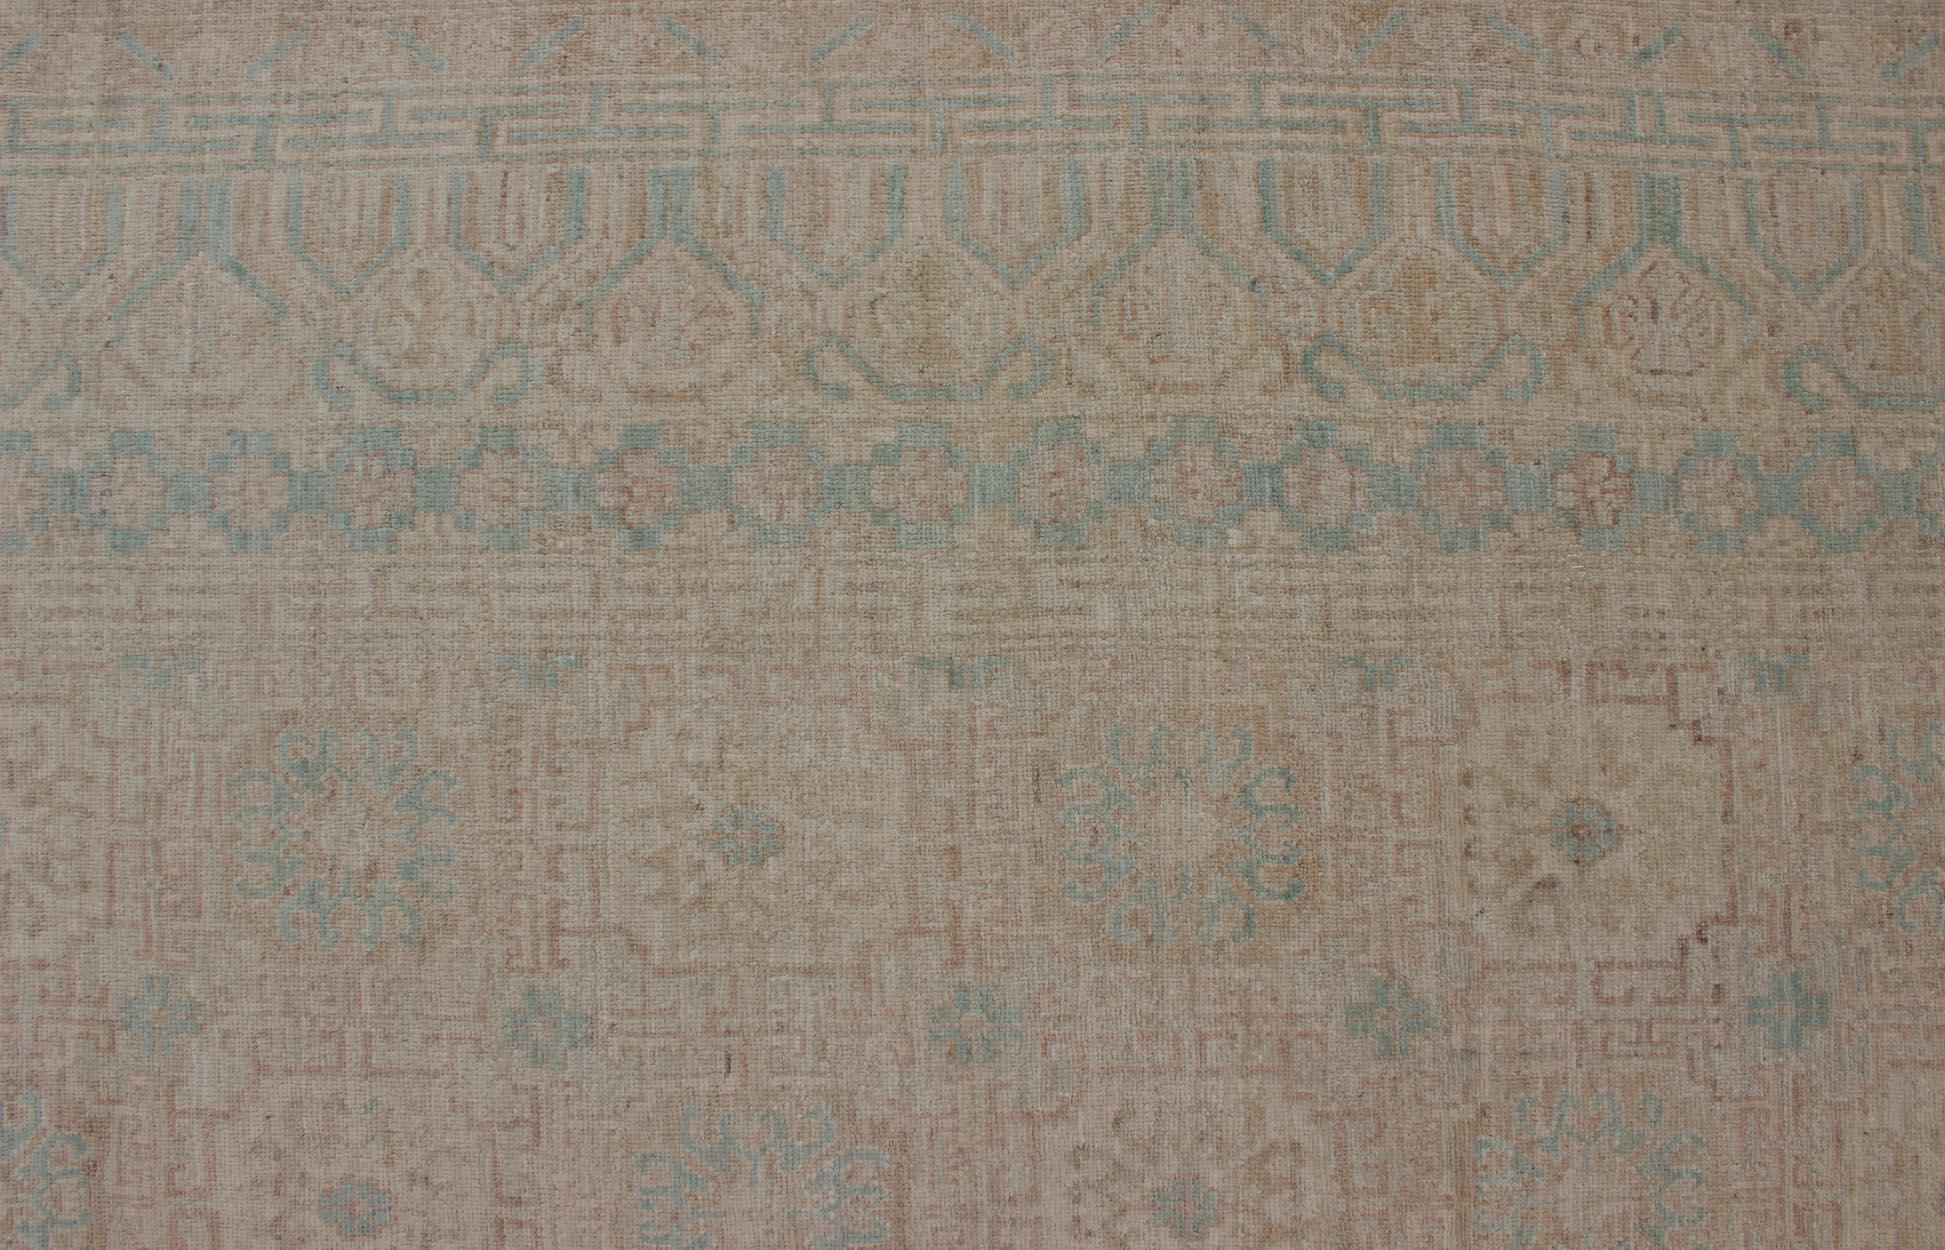 Khotan Design Rug with Geometric Medallions in Tan and Turquoise For Sale 3